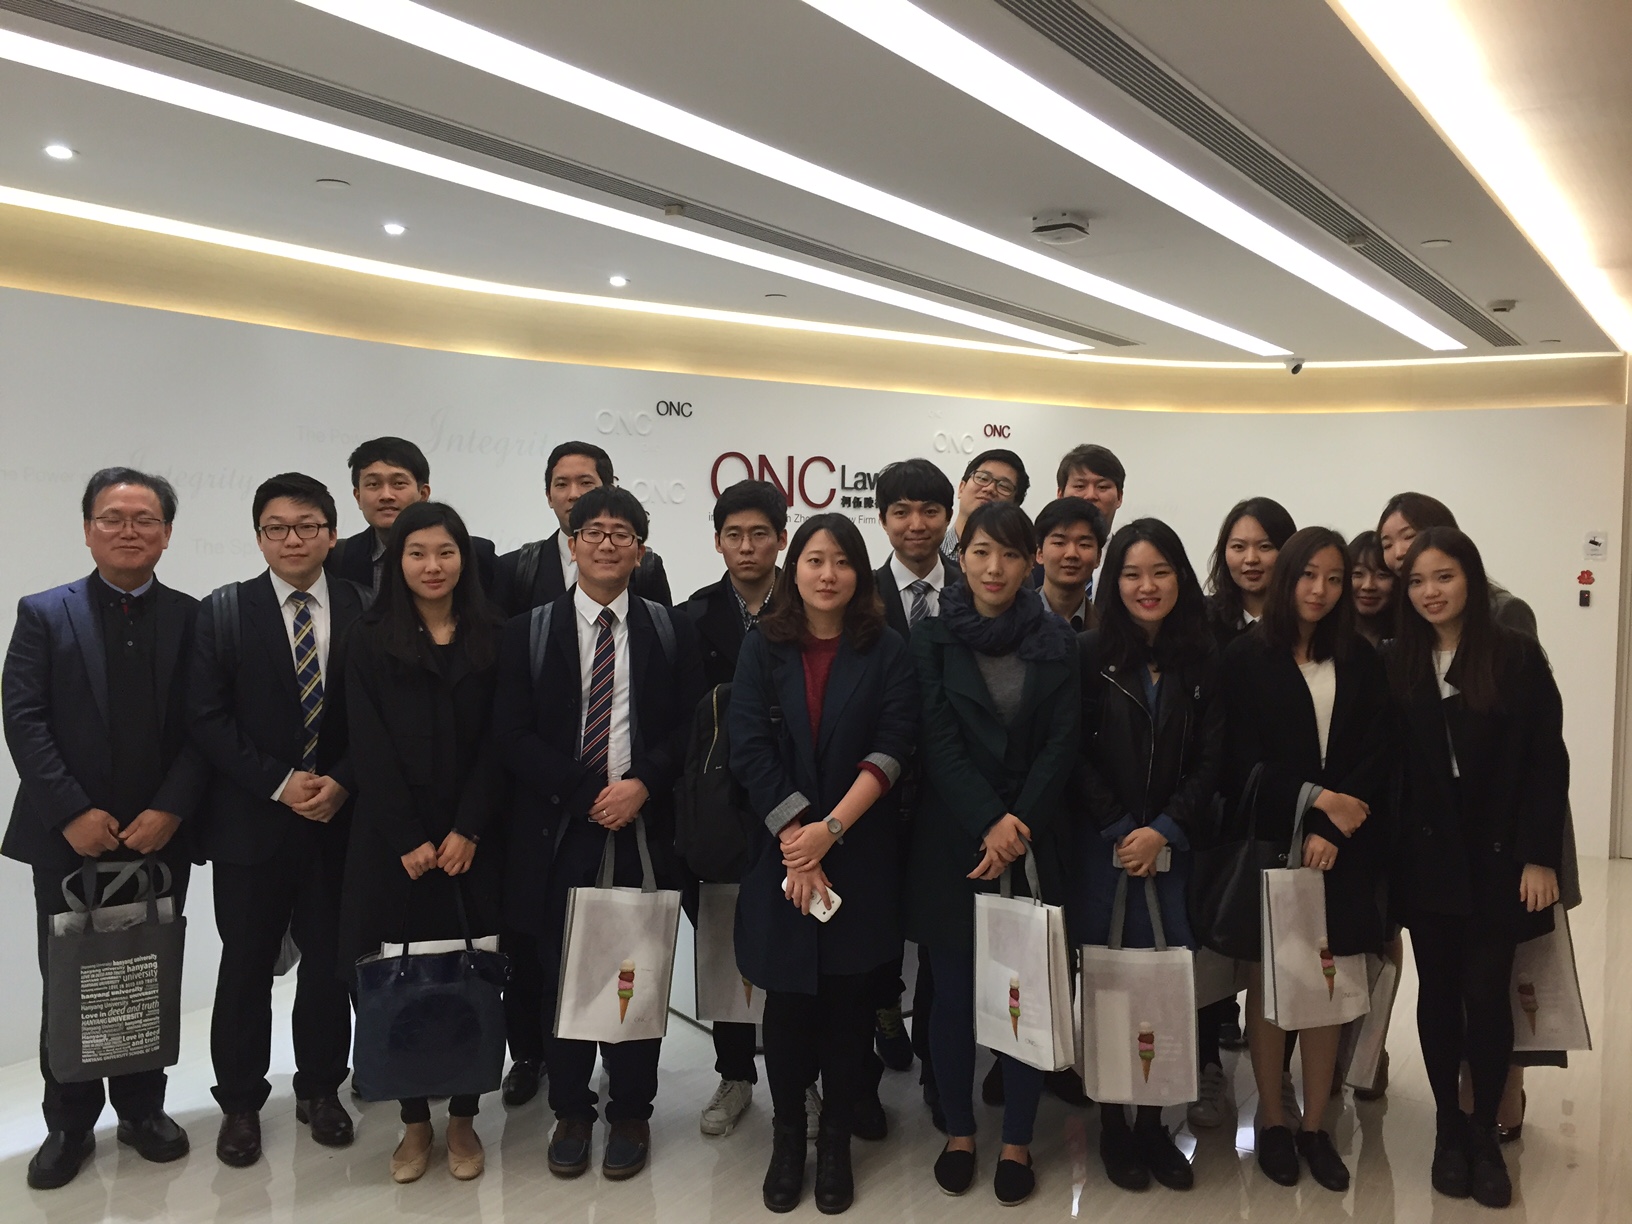 ONC Lawyers played host to a group of Korean law students